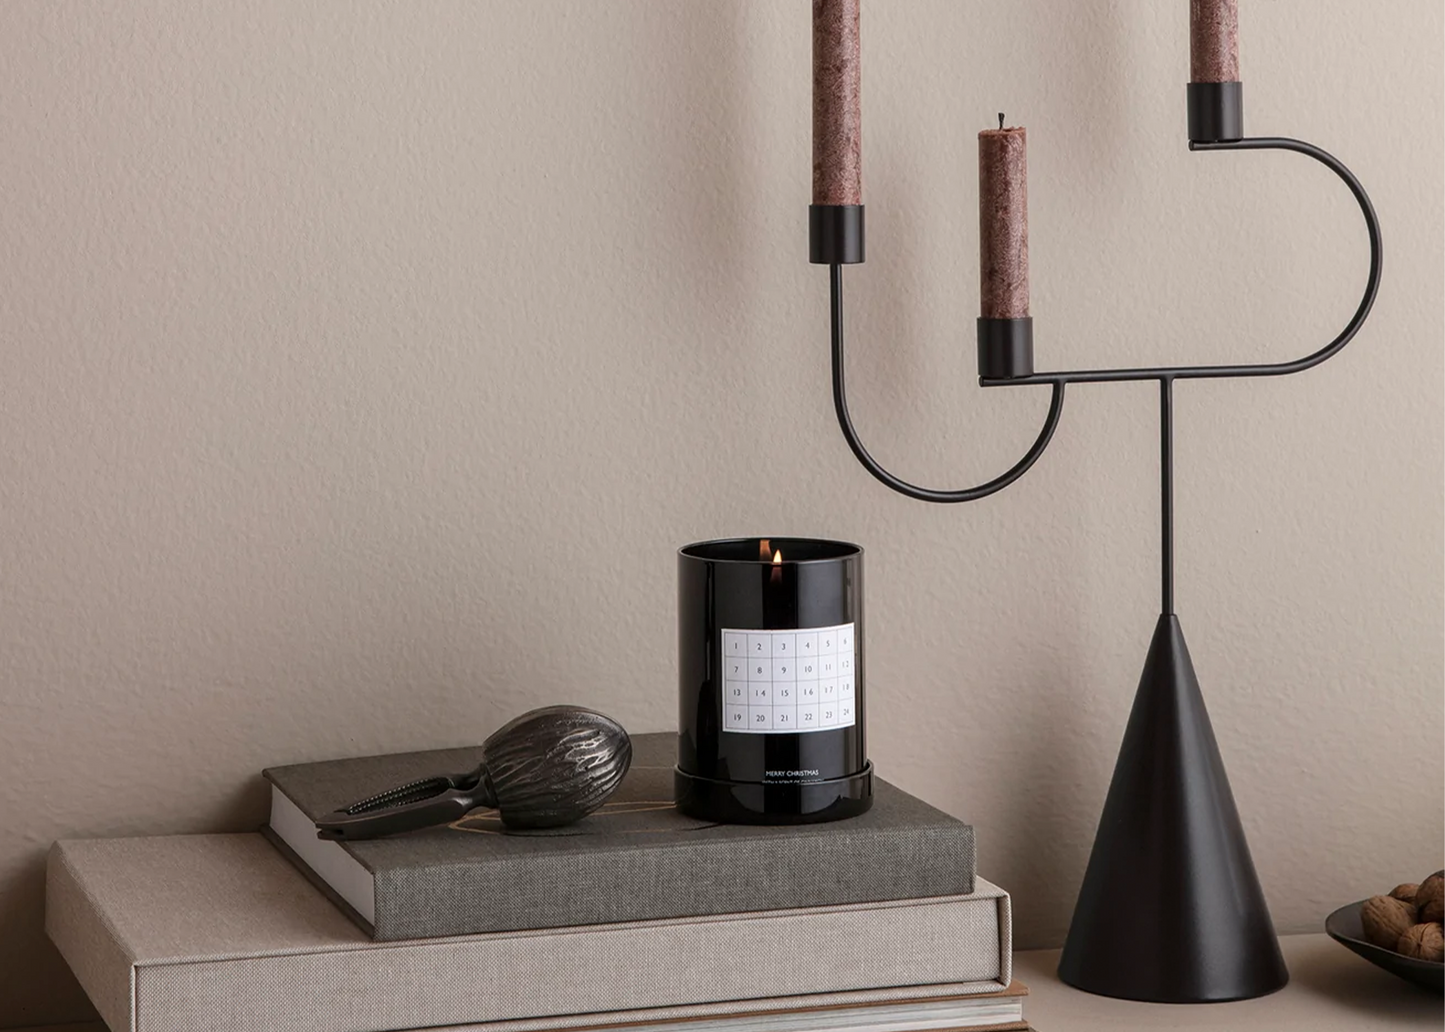 Avant Candelabra Black by Ferm living on a table next to a candle and book.